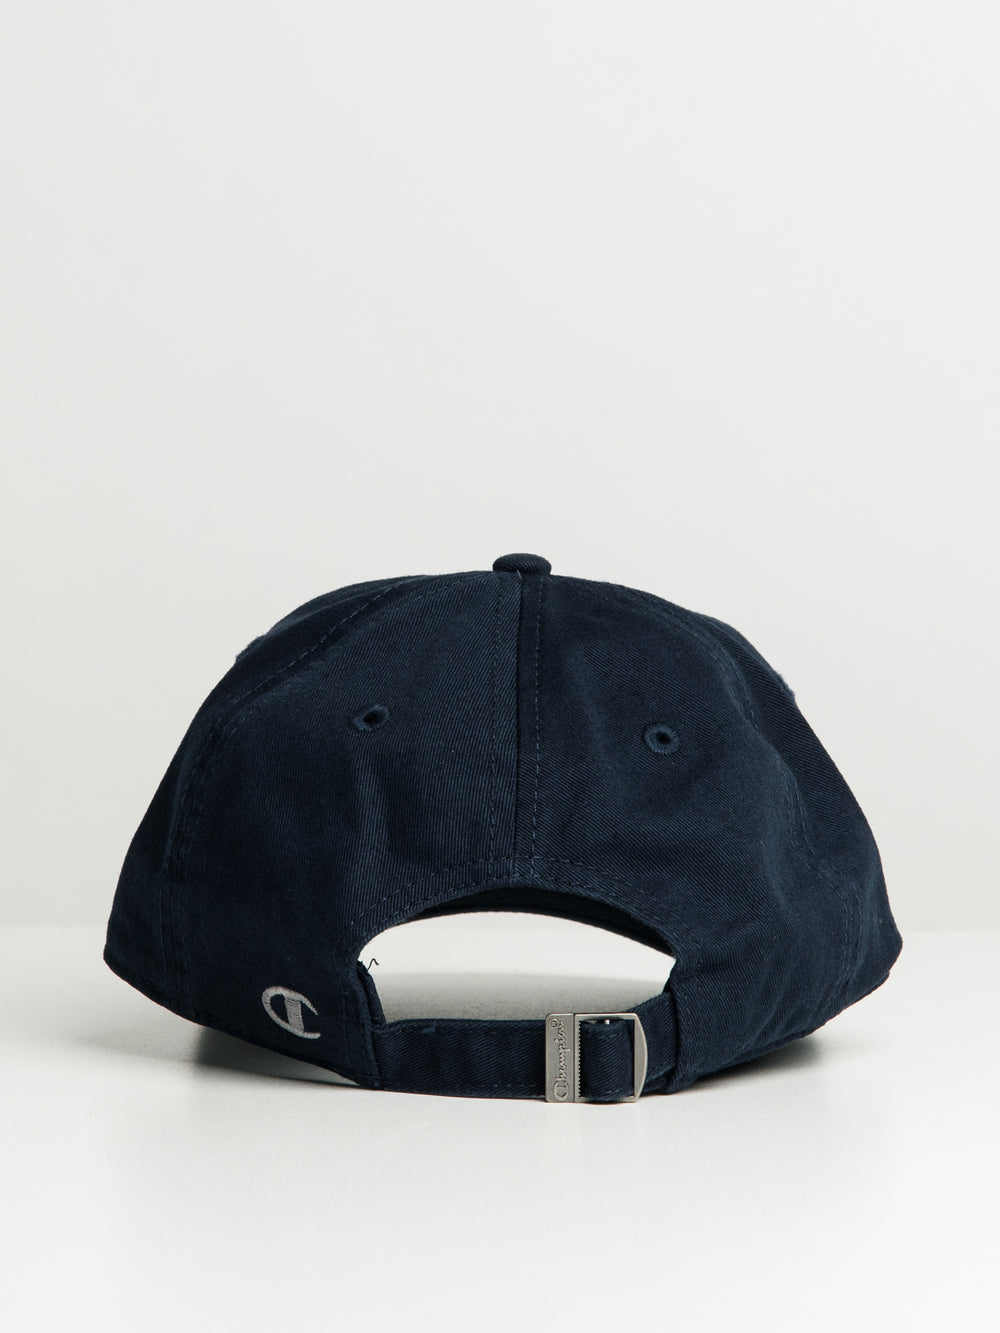 CHAMPION YALE ADJUSTABLE TWILL HAT - CLEARANCE